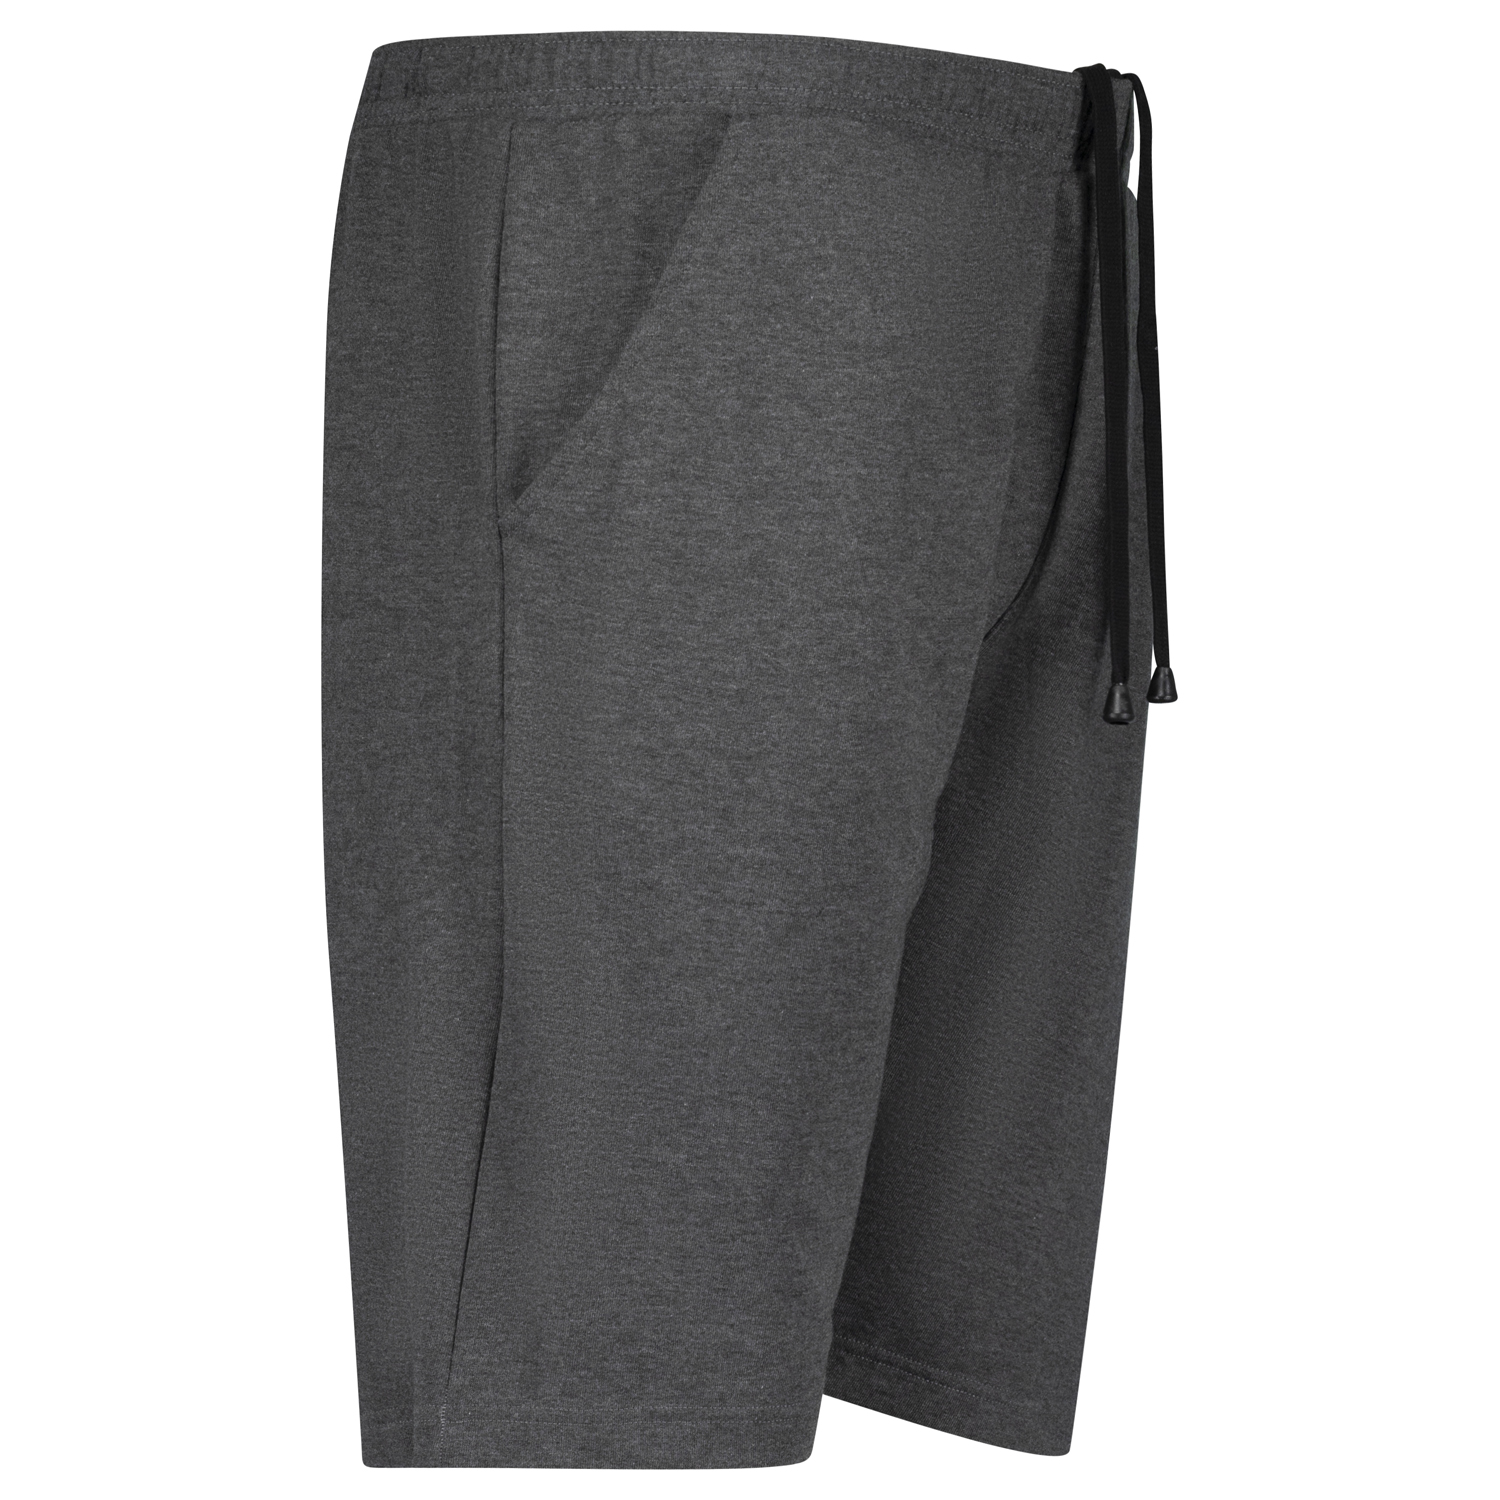 Anthracite mottled short jogging trousers series Athen up to oversize 14XL by Adamo for men